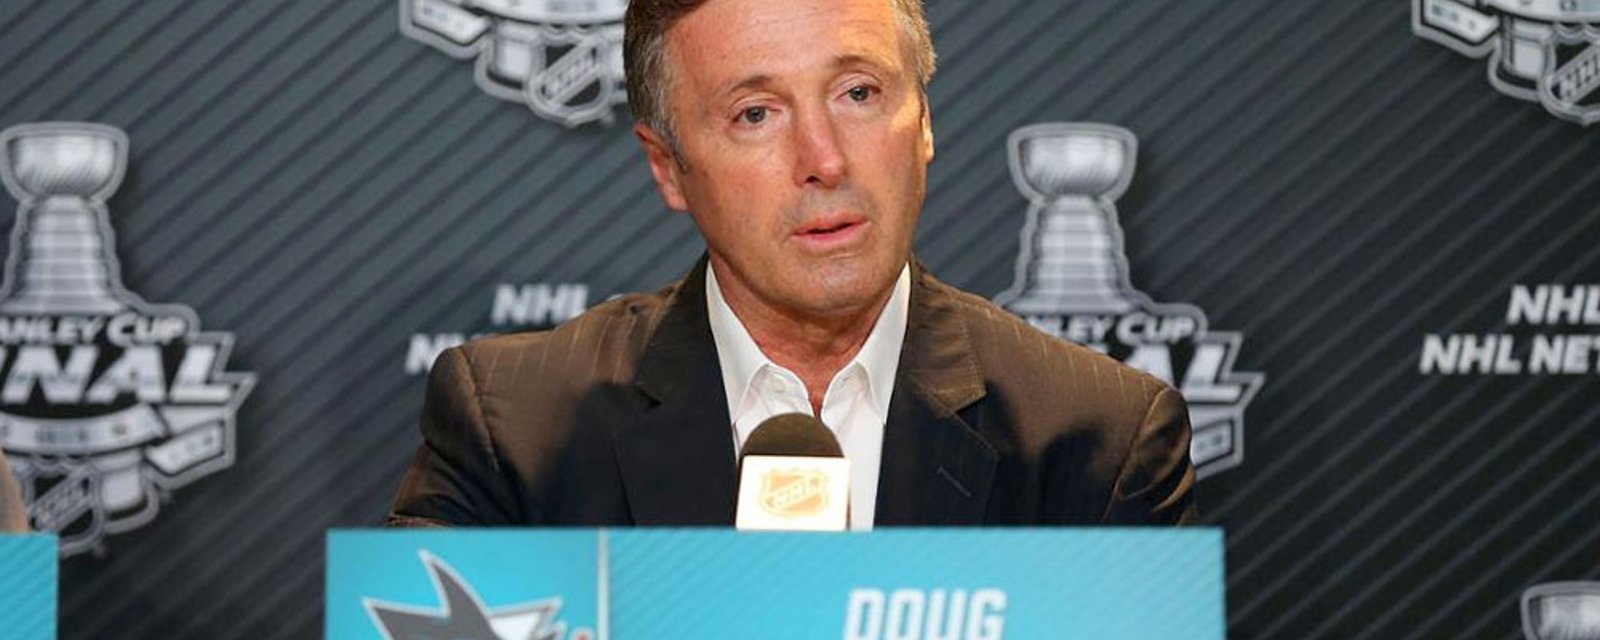 Sharks announce front office changes amidst awful losing season